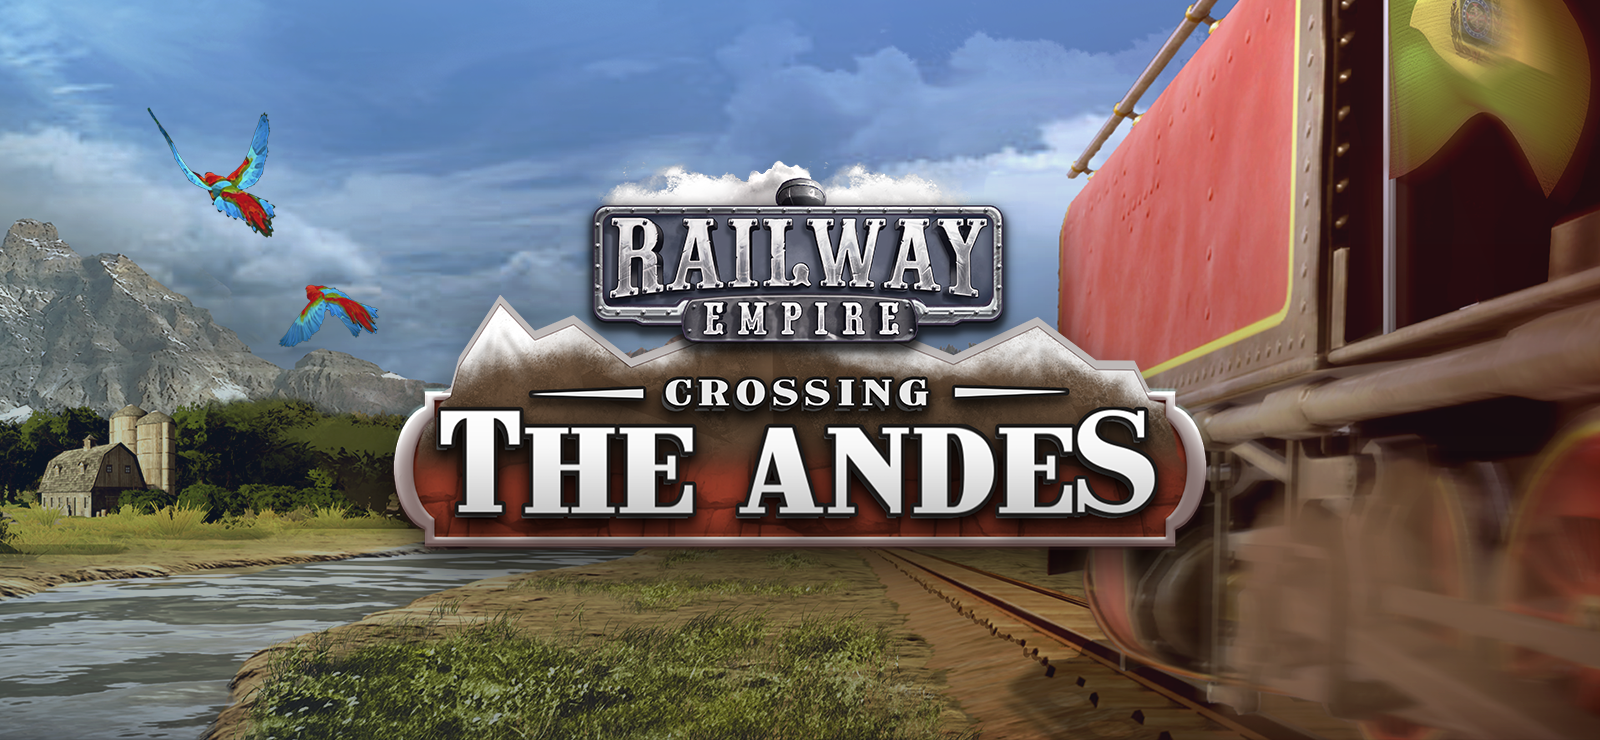 Railway Empire: Crossing The Andes